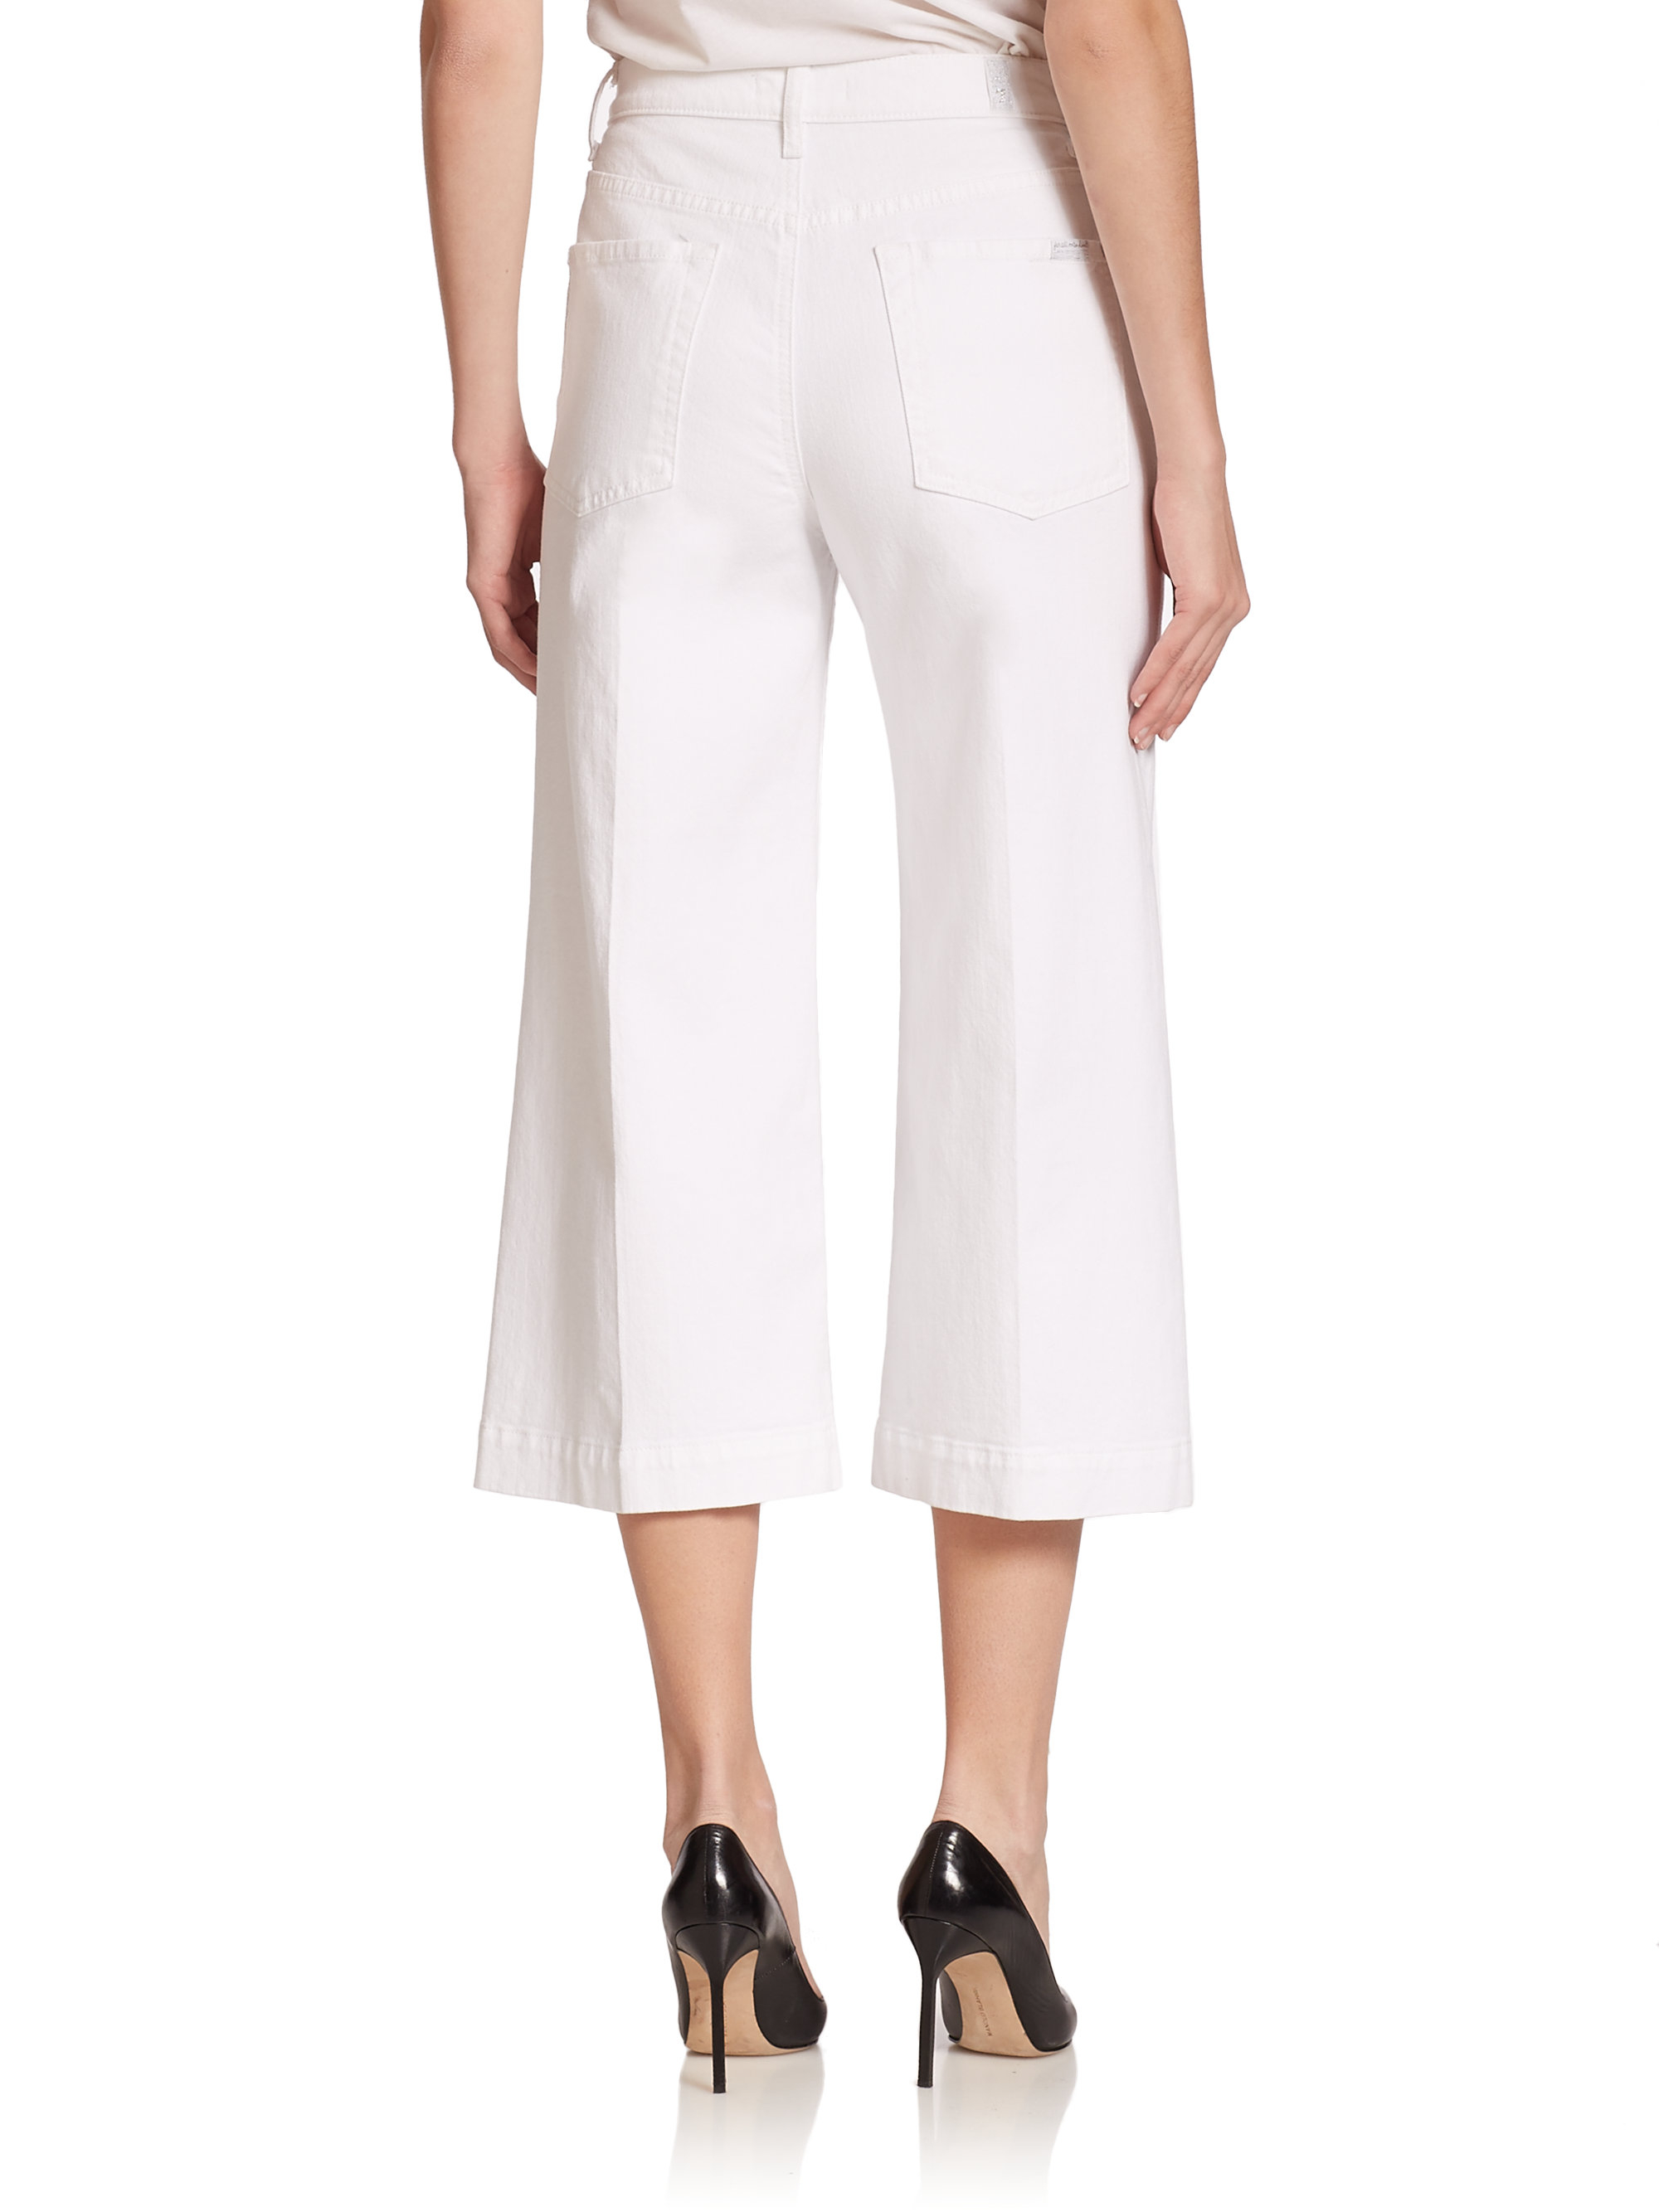 7 for all mankind Denim Culottes in White | Lyst